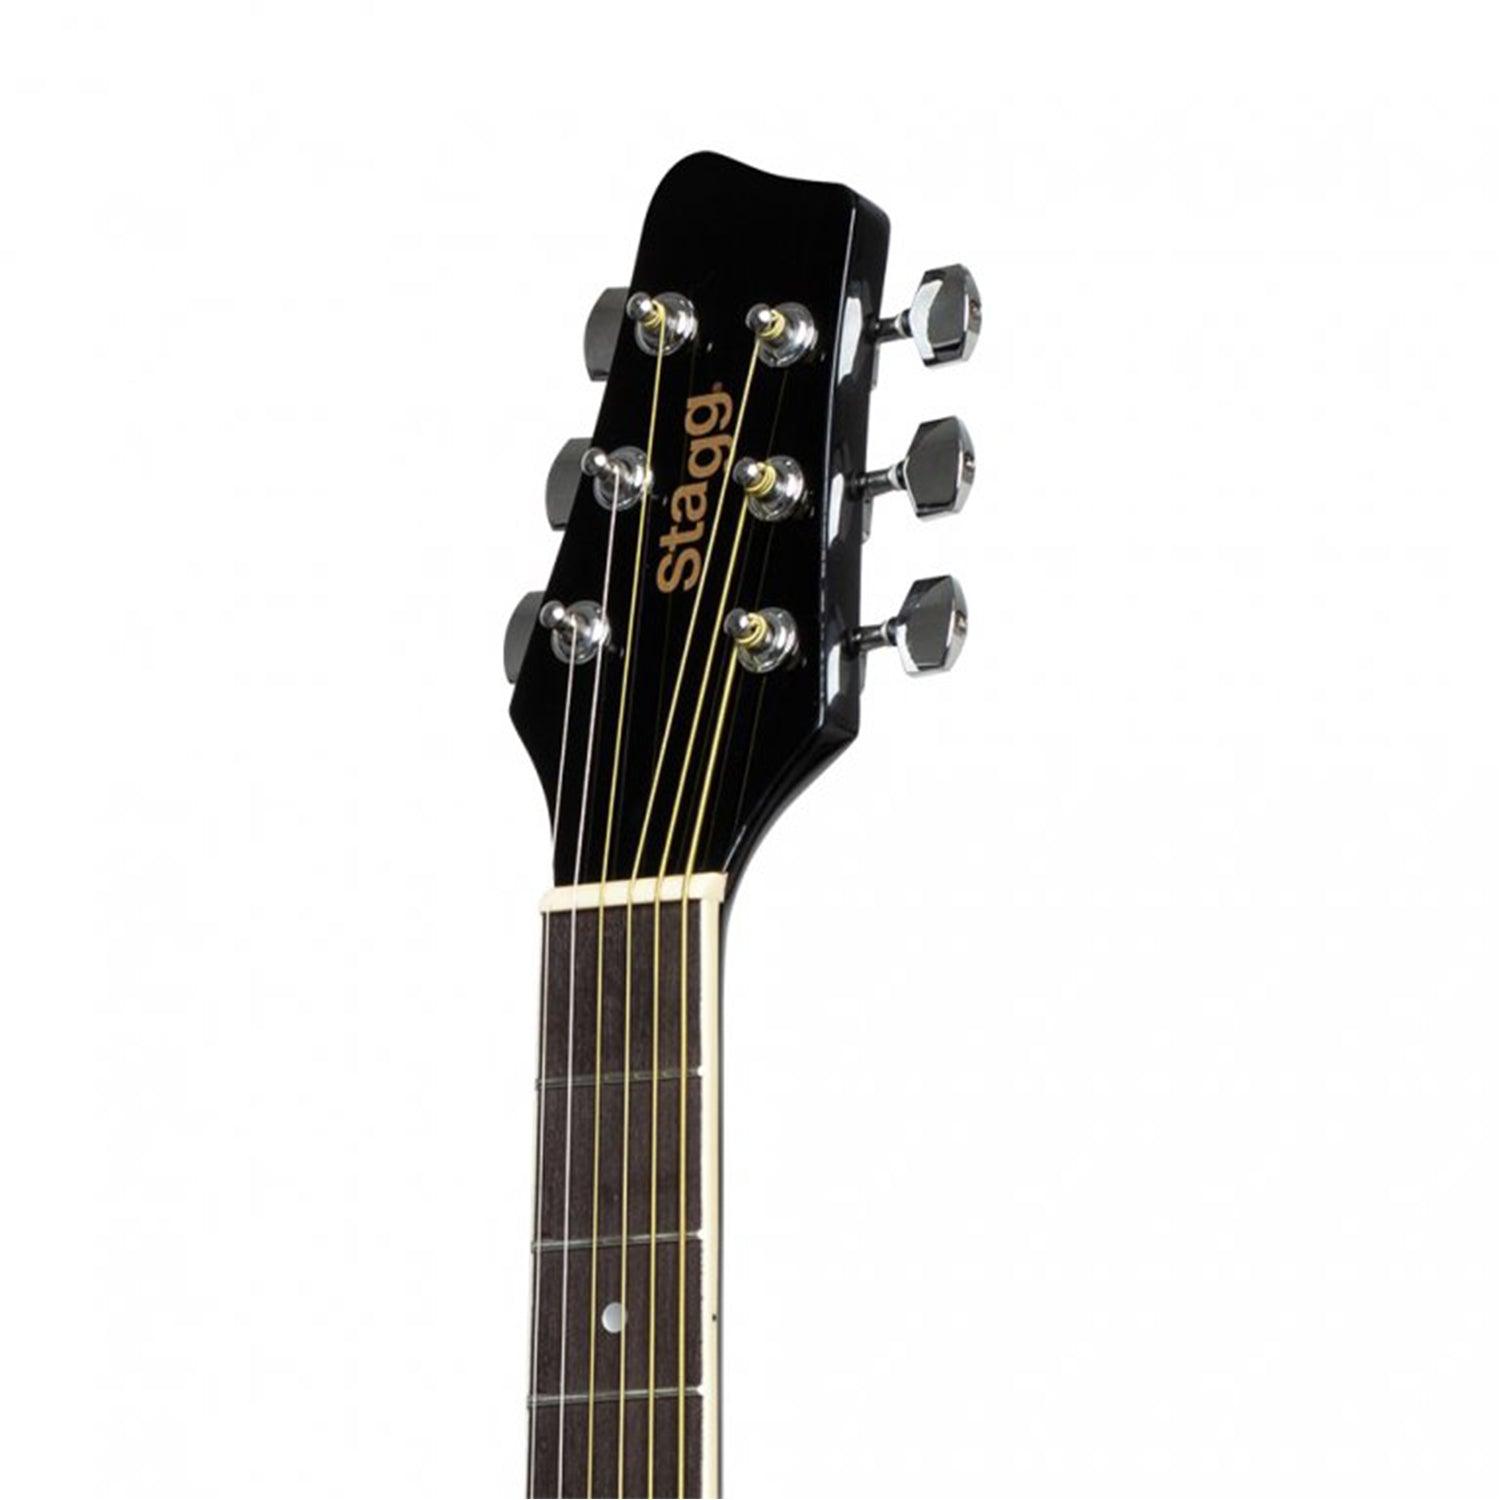 Stagg SA20D LH-BLK Black Dreadnought Acoustic Guitar with Basswood Top Left Hand - DY Pro Audio